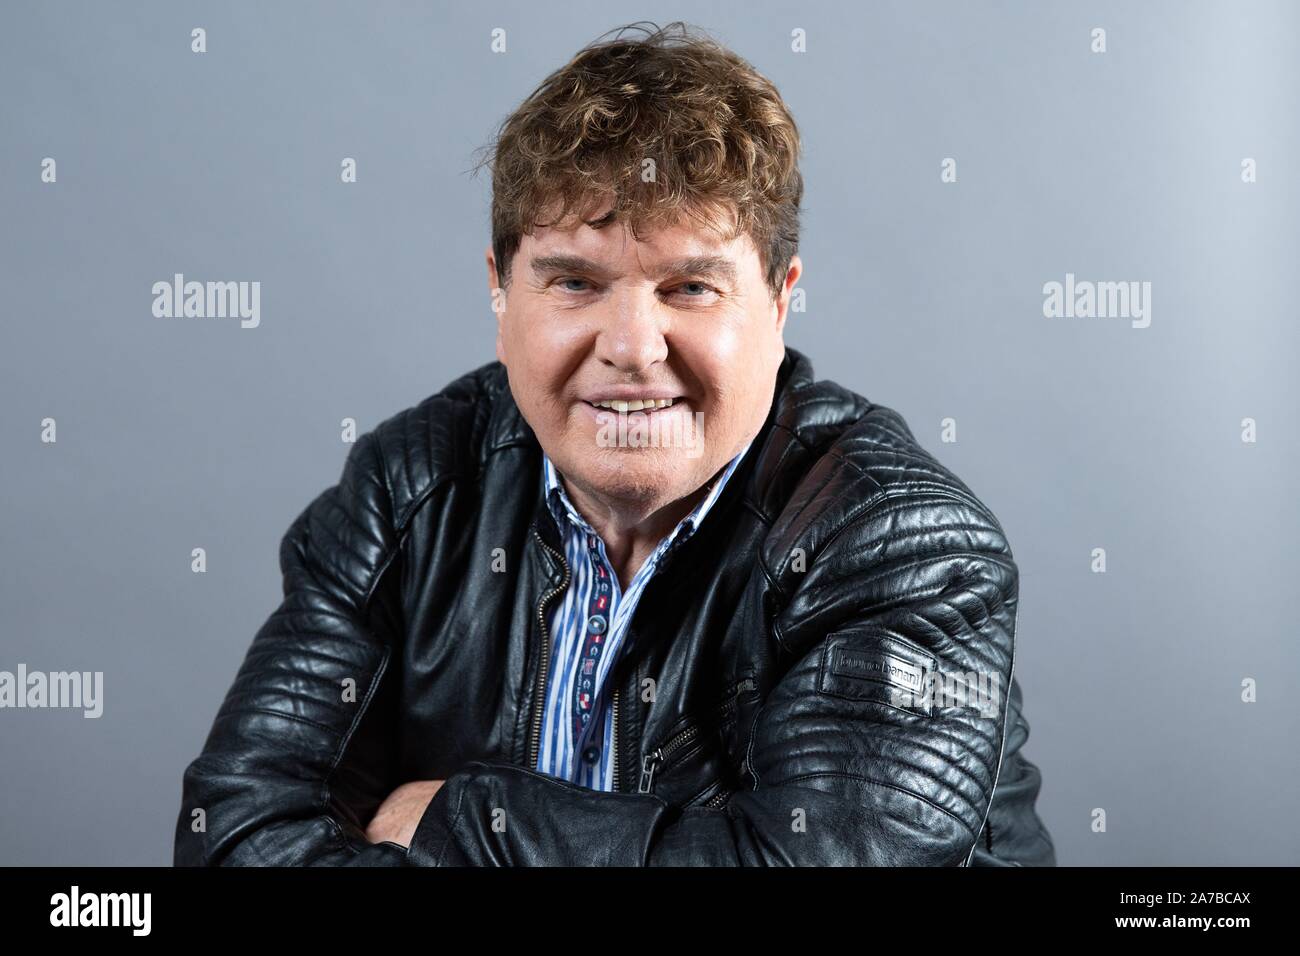 Dresden, Germany. 30th Oct, 2019. The singer Frank Schöbel sits in front of a photo wall in the boulevard theatre. The occasion is the presentation of the musical "Frank Schöbel Story", which deals with the career of the GDR hit singer Frank Schöbel on stage. Credit: Sebastian Kahnert/dpa-Zentralbild/dpa/Alamy Live News Stock Photo